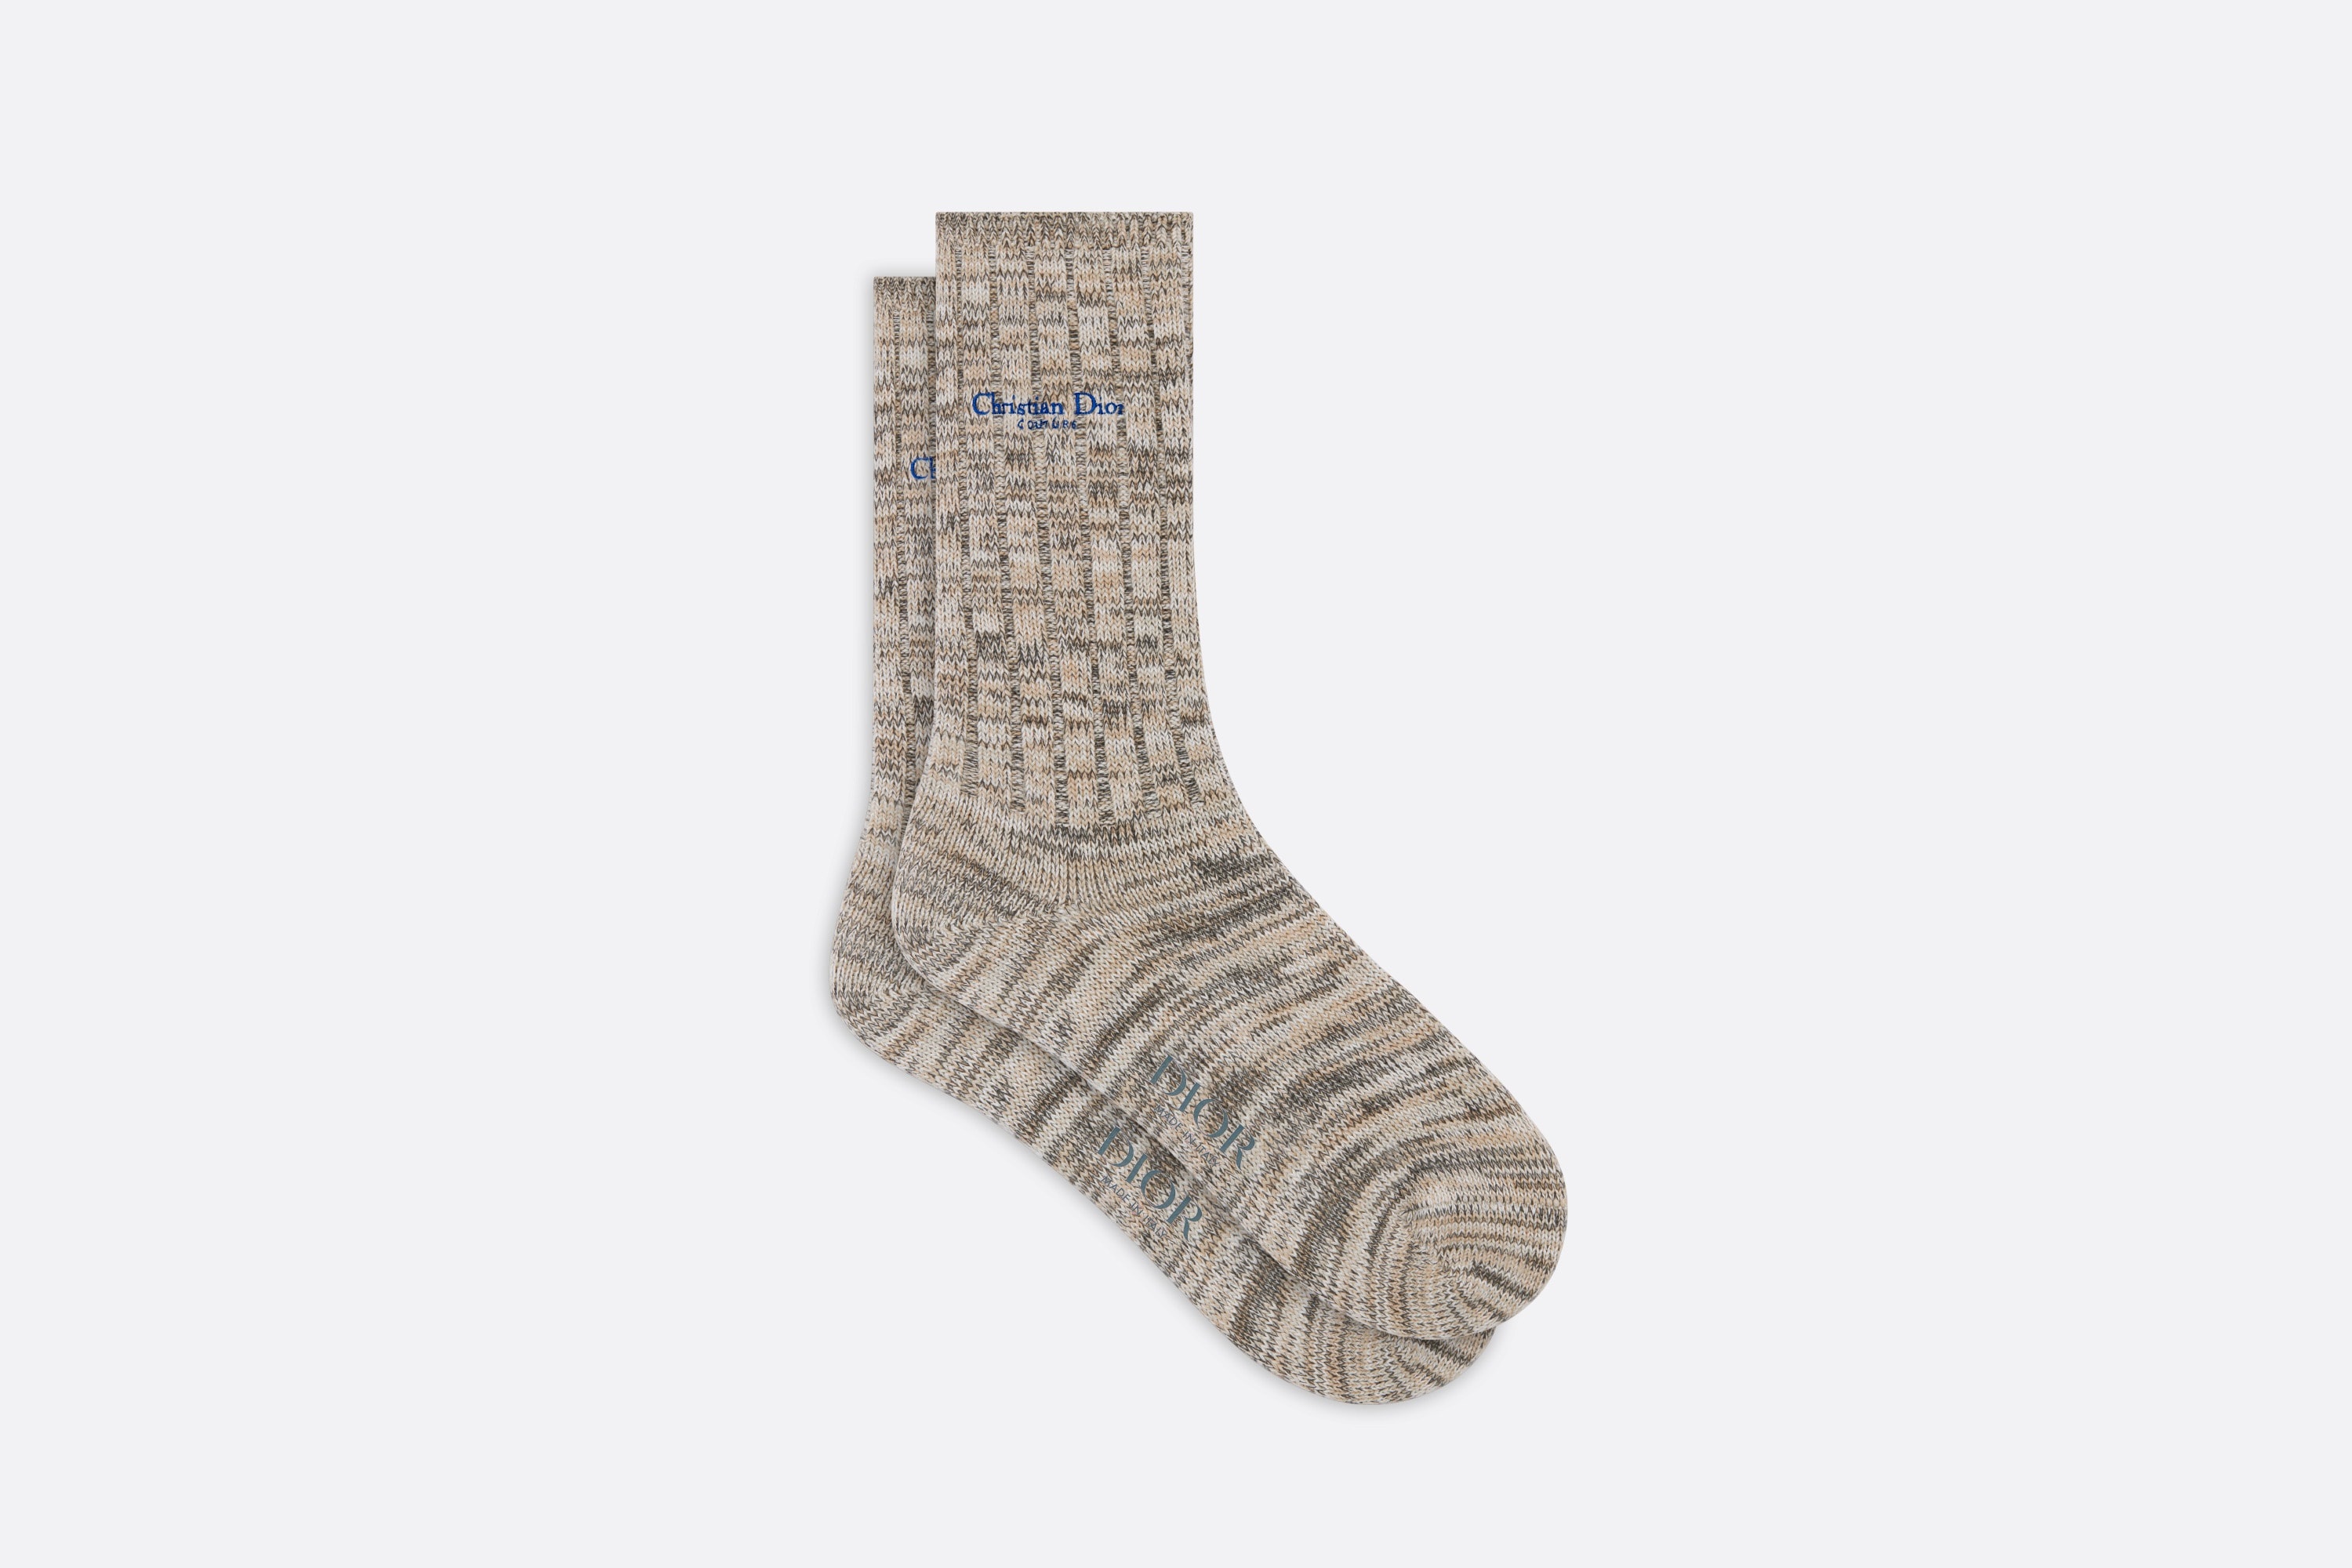 Christian Dior Couture Socks - 1